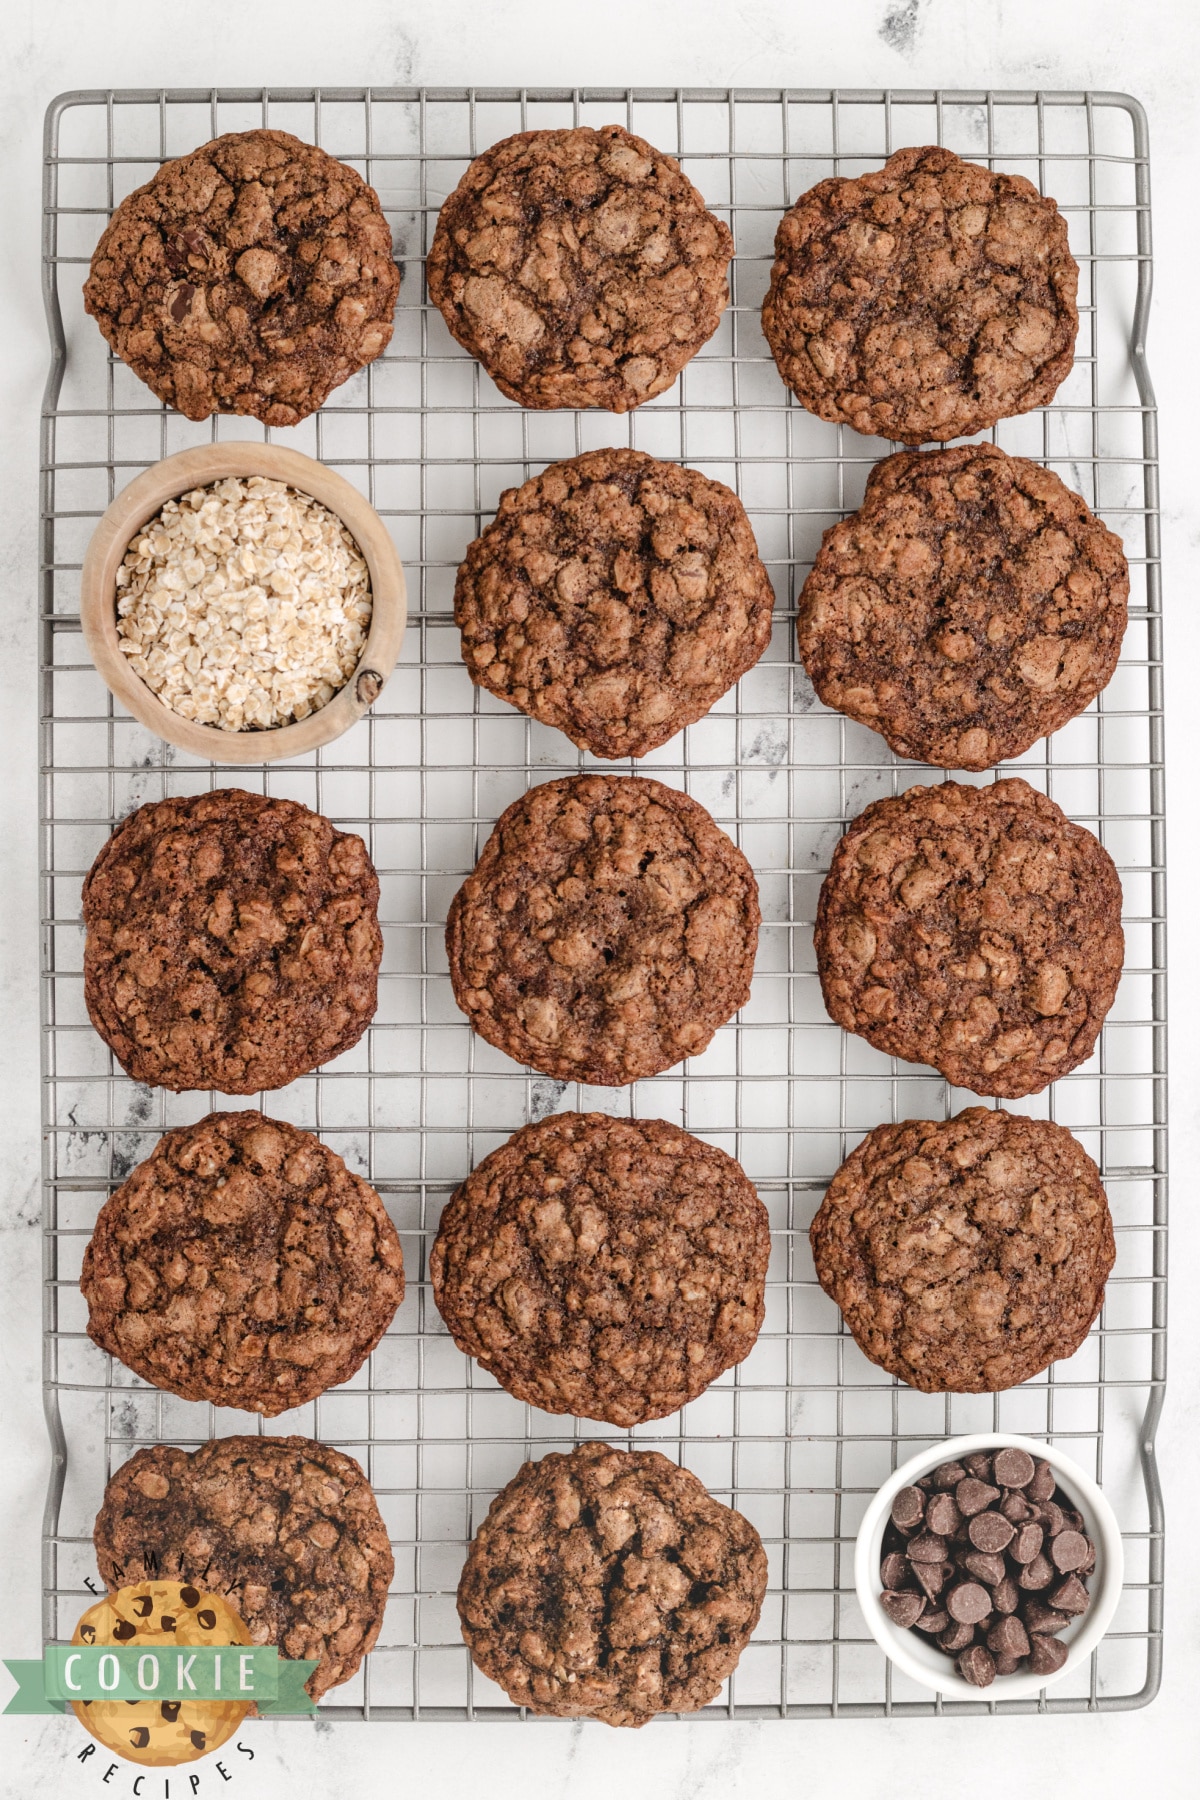 Chocolate oatmeal cookies on a wire rack to cool. 